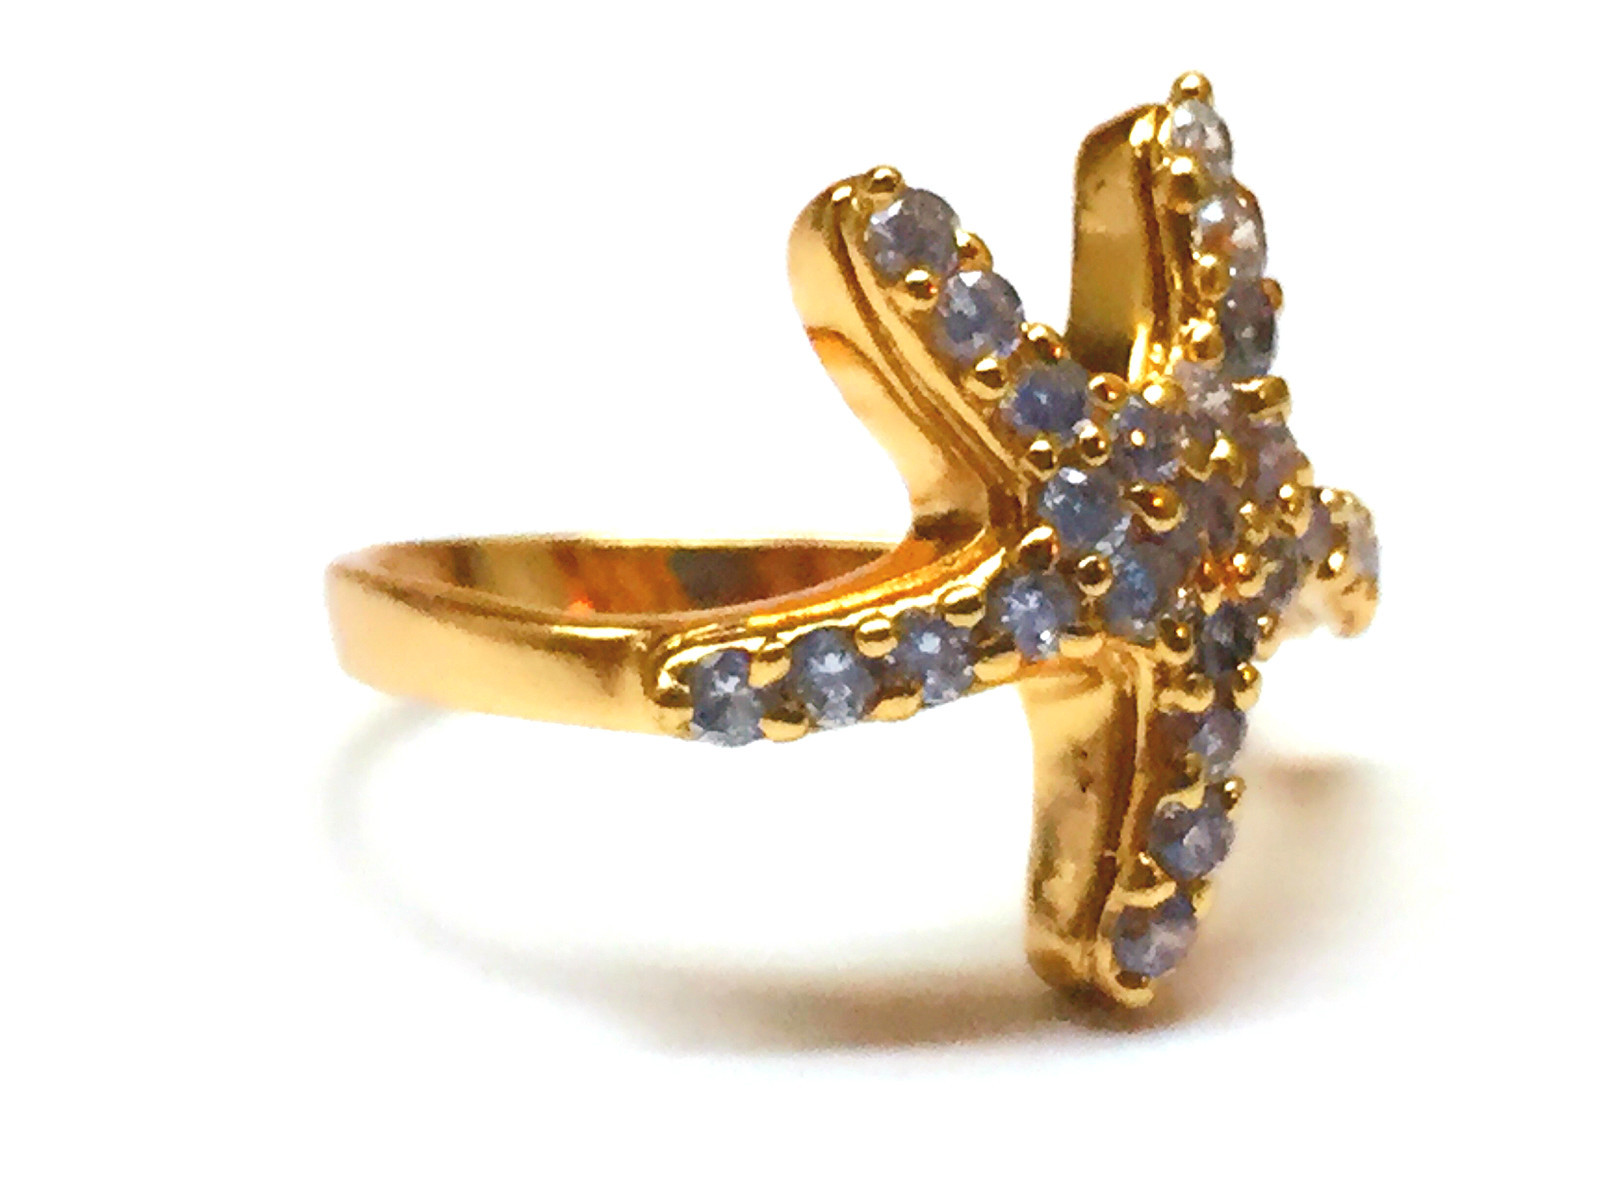 Star fish simulated diamond 24k gold filled wedding ring proposal marry ring - £31.96 GBP